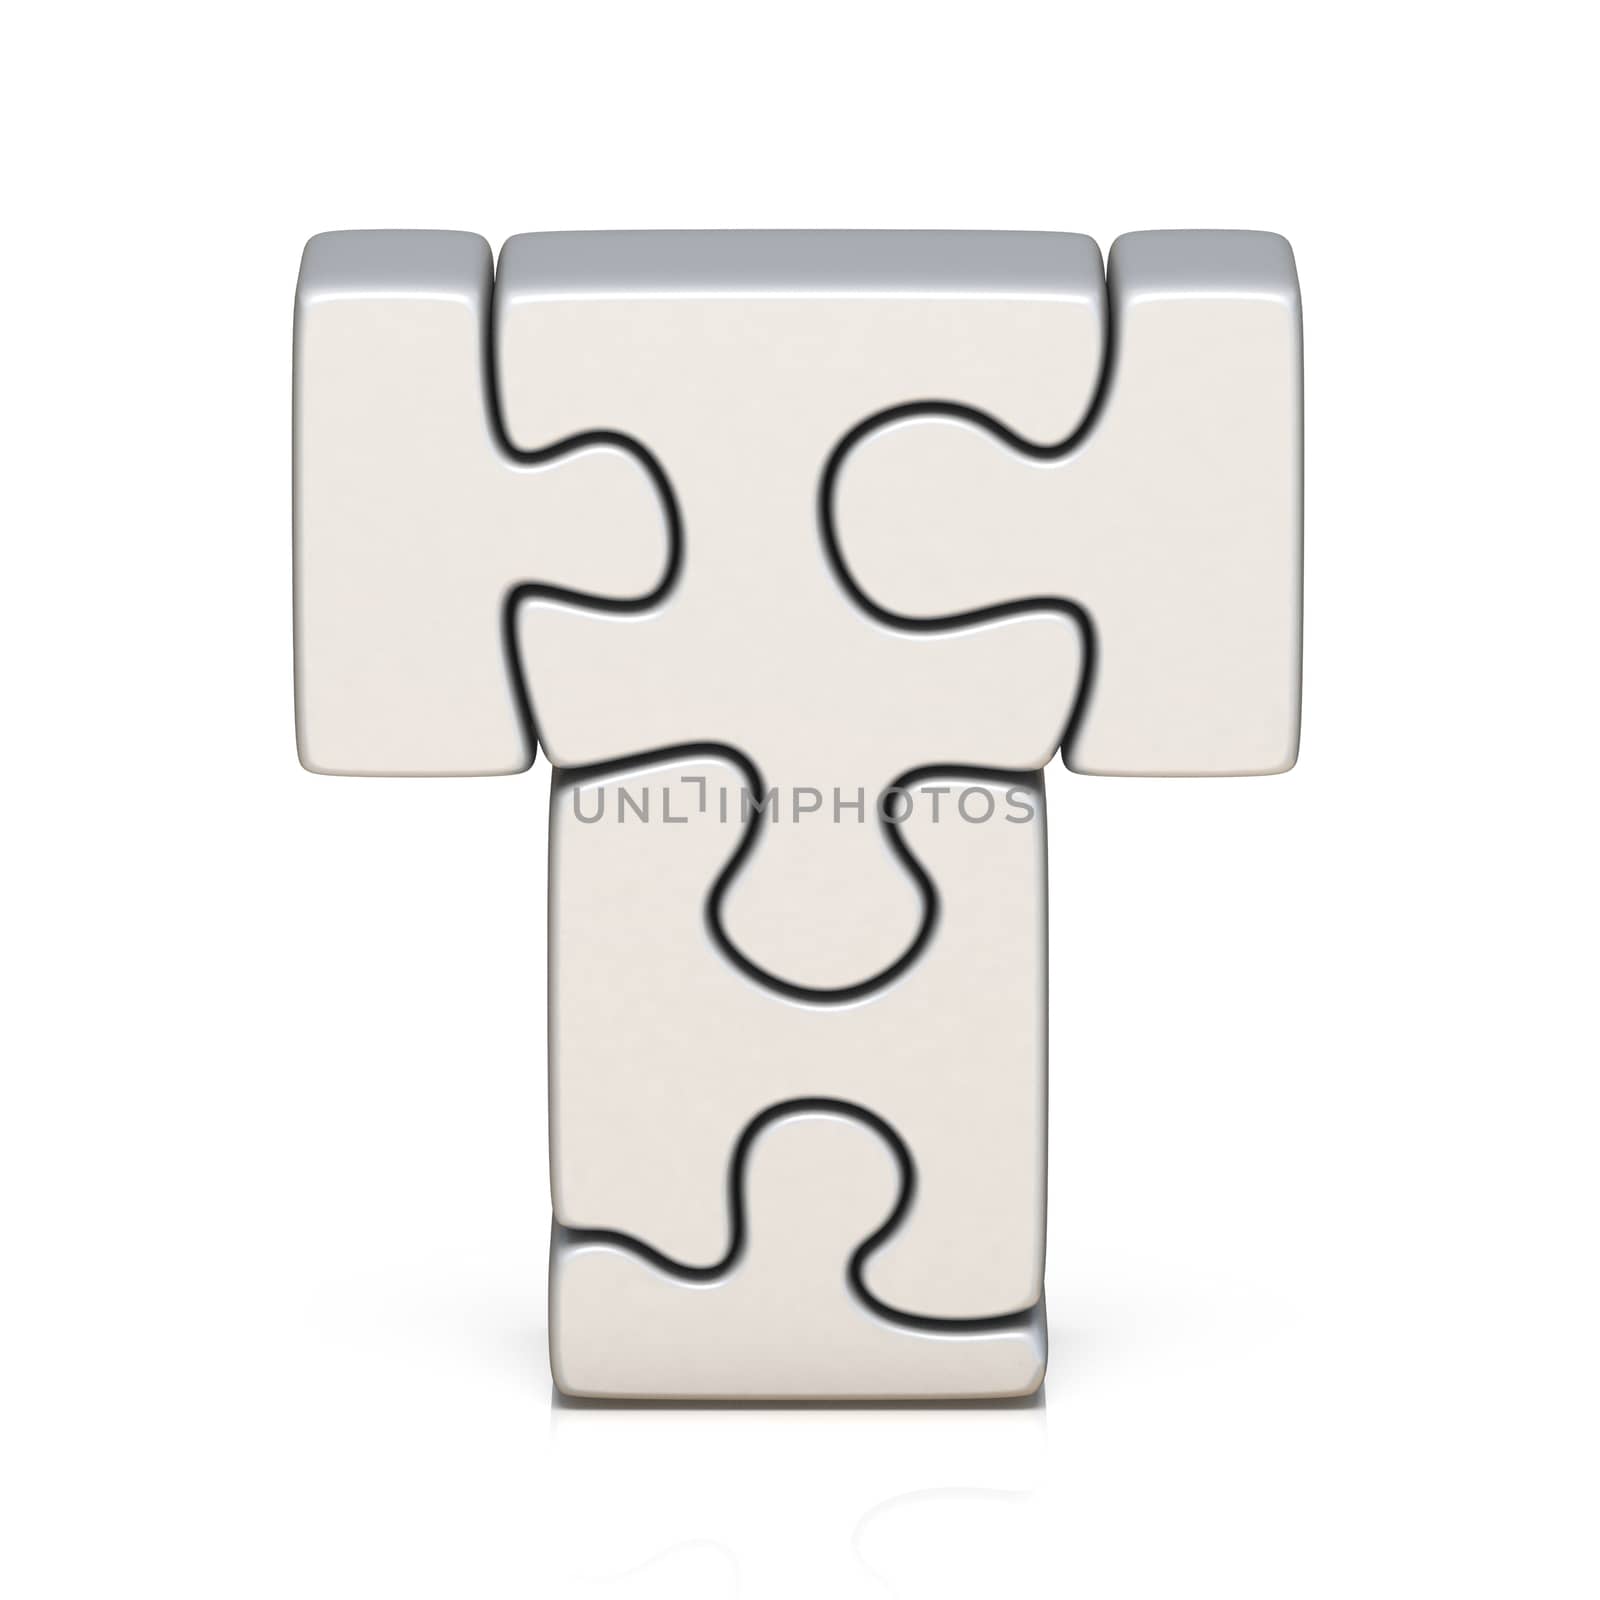 White puzzle jigsaw letter T 3D render illustration isolated on white background